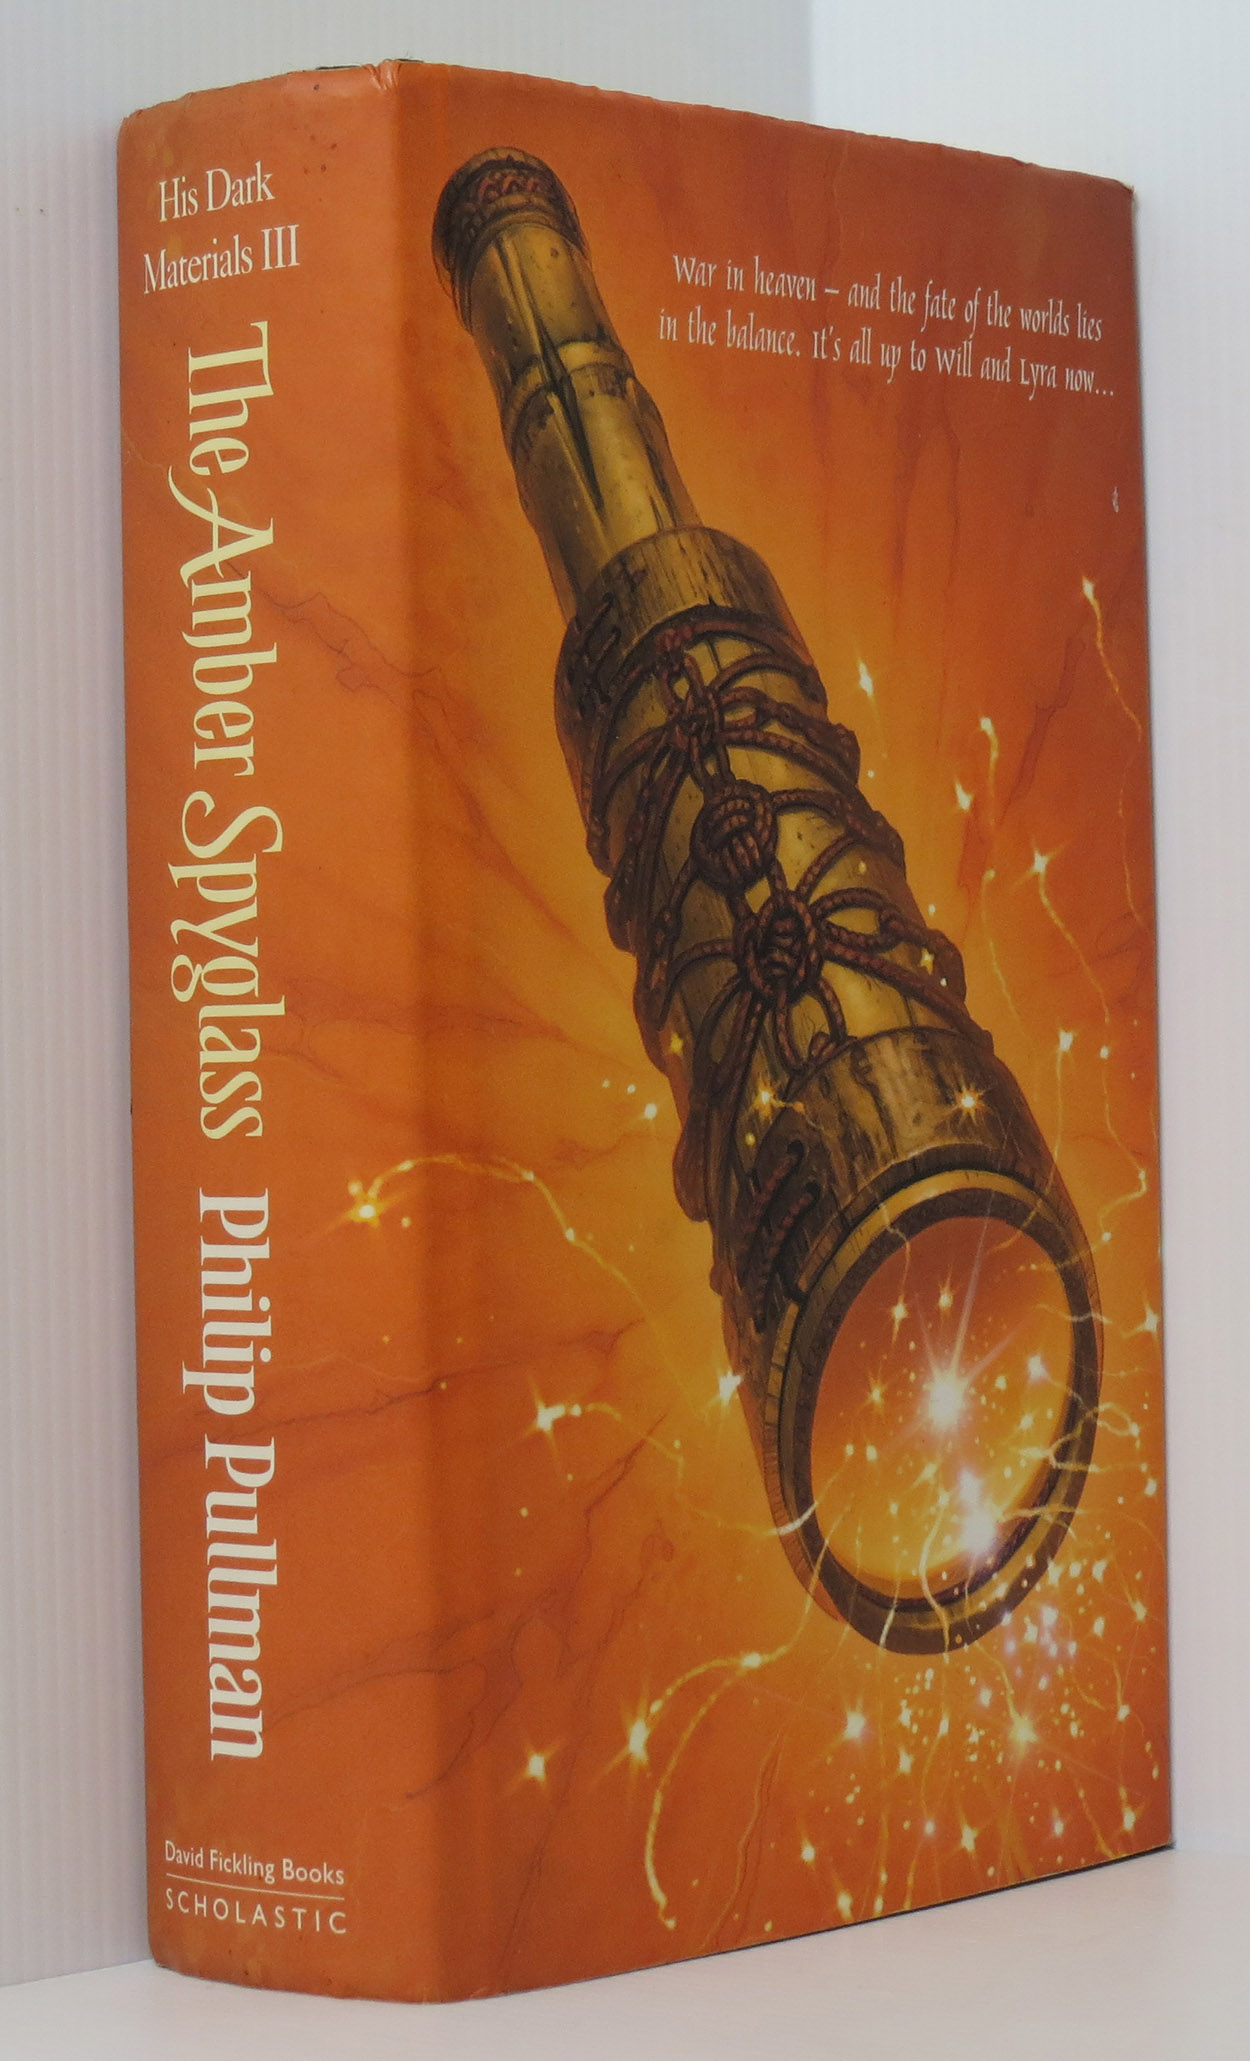 Image for The Amber Spyglass